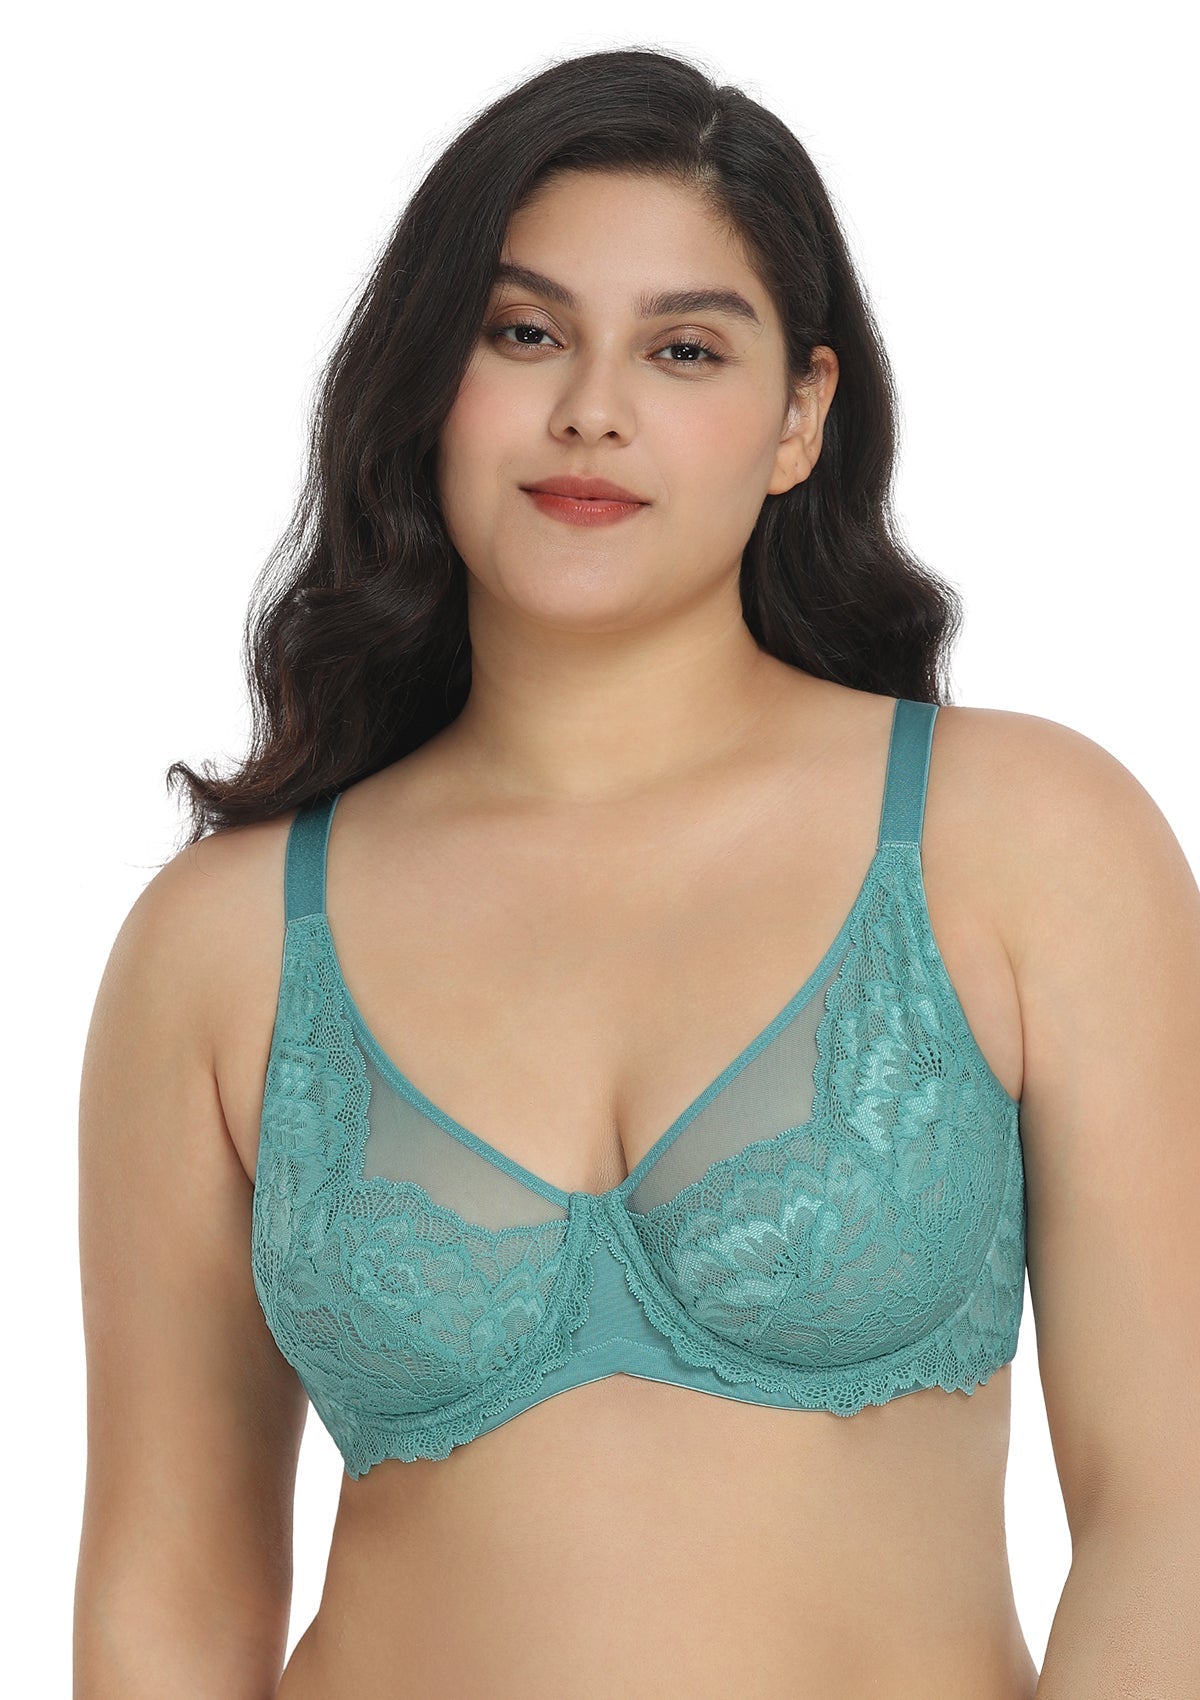 HSIA Paeonia Lace Full Coverage Underwire Non-Padded Uplifting Bra - Teal / 42 / D